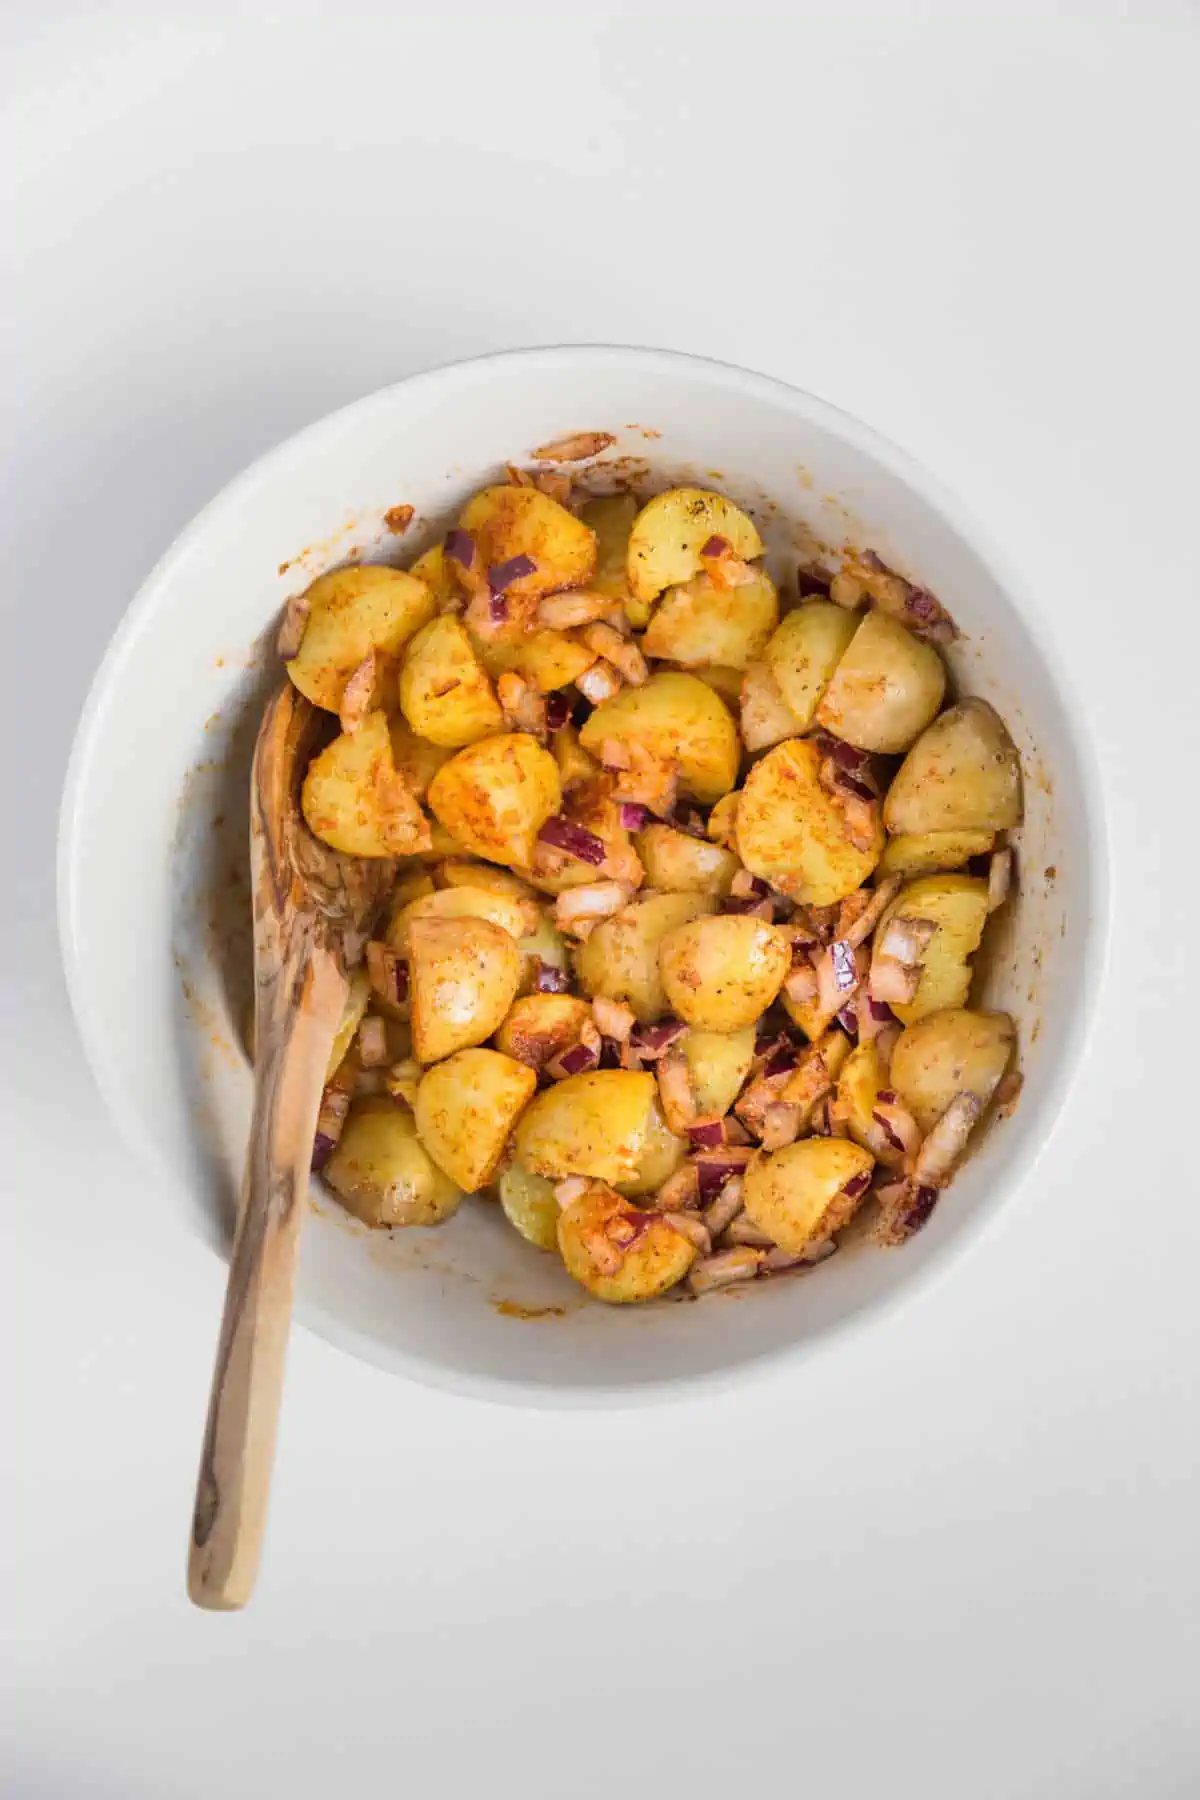 A large mixing bowl with potatoes, onions and seasonings all mixed together.